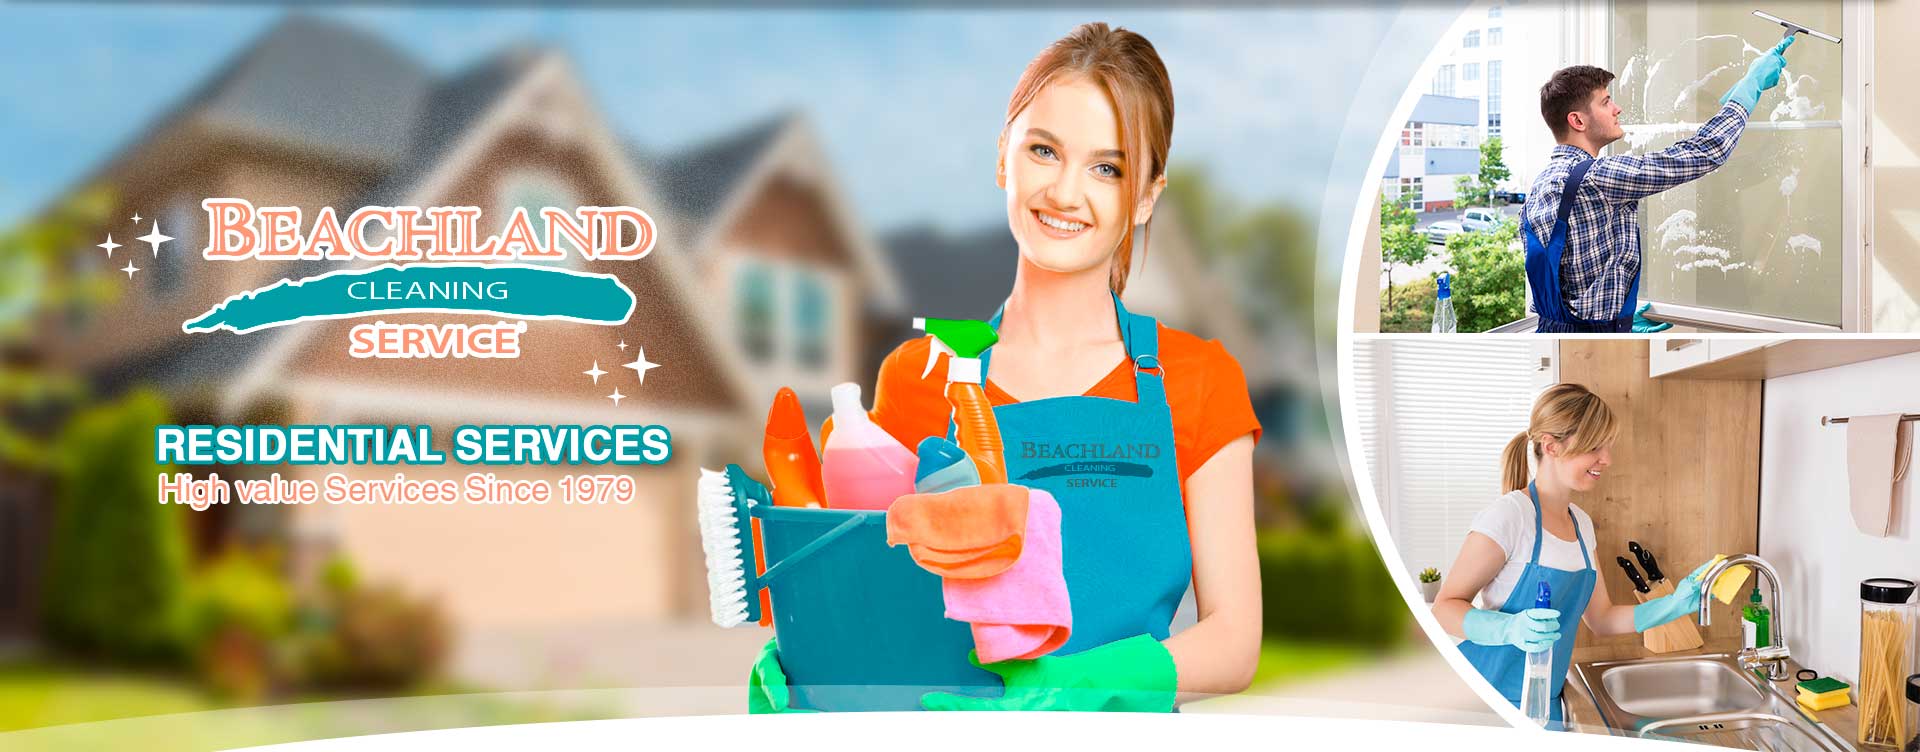 General Office Cleaning Services in Hobe Sound